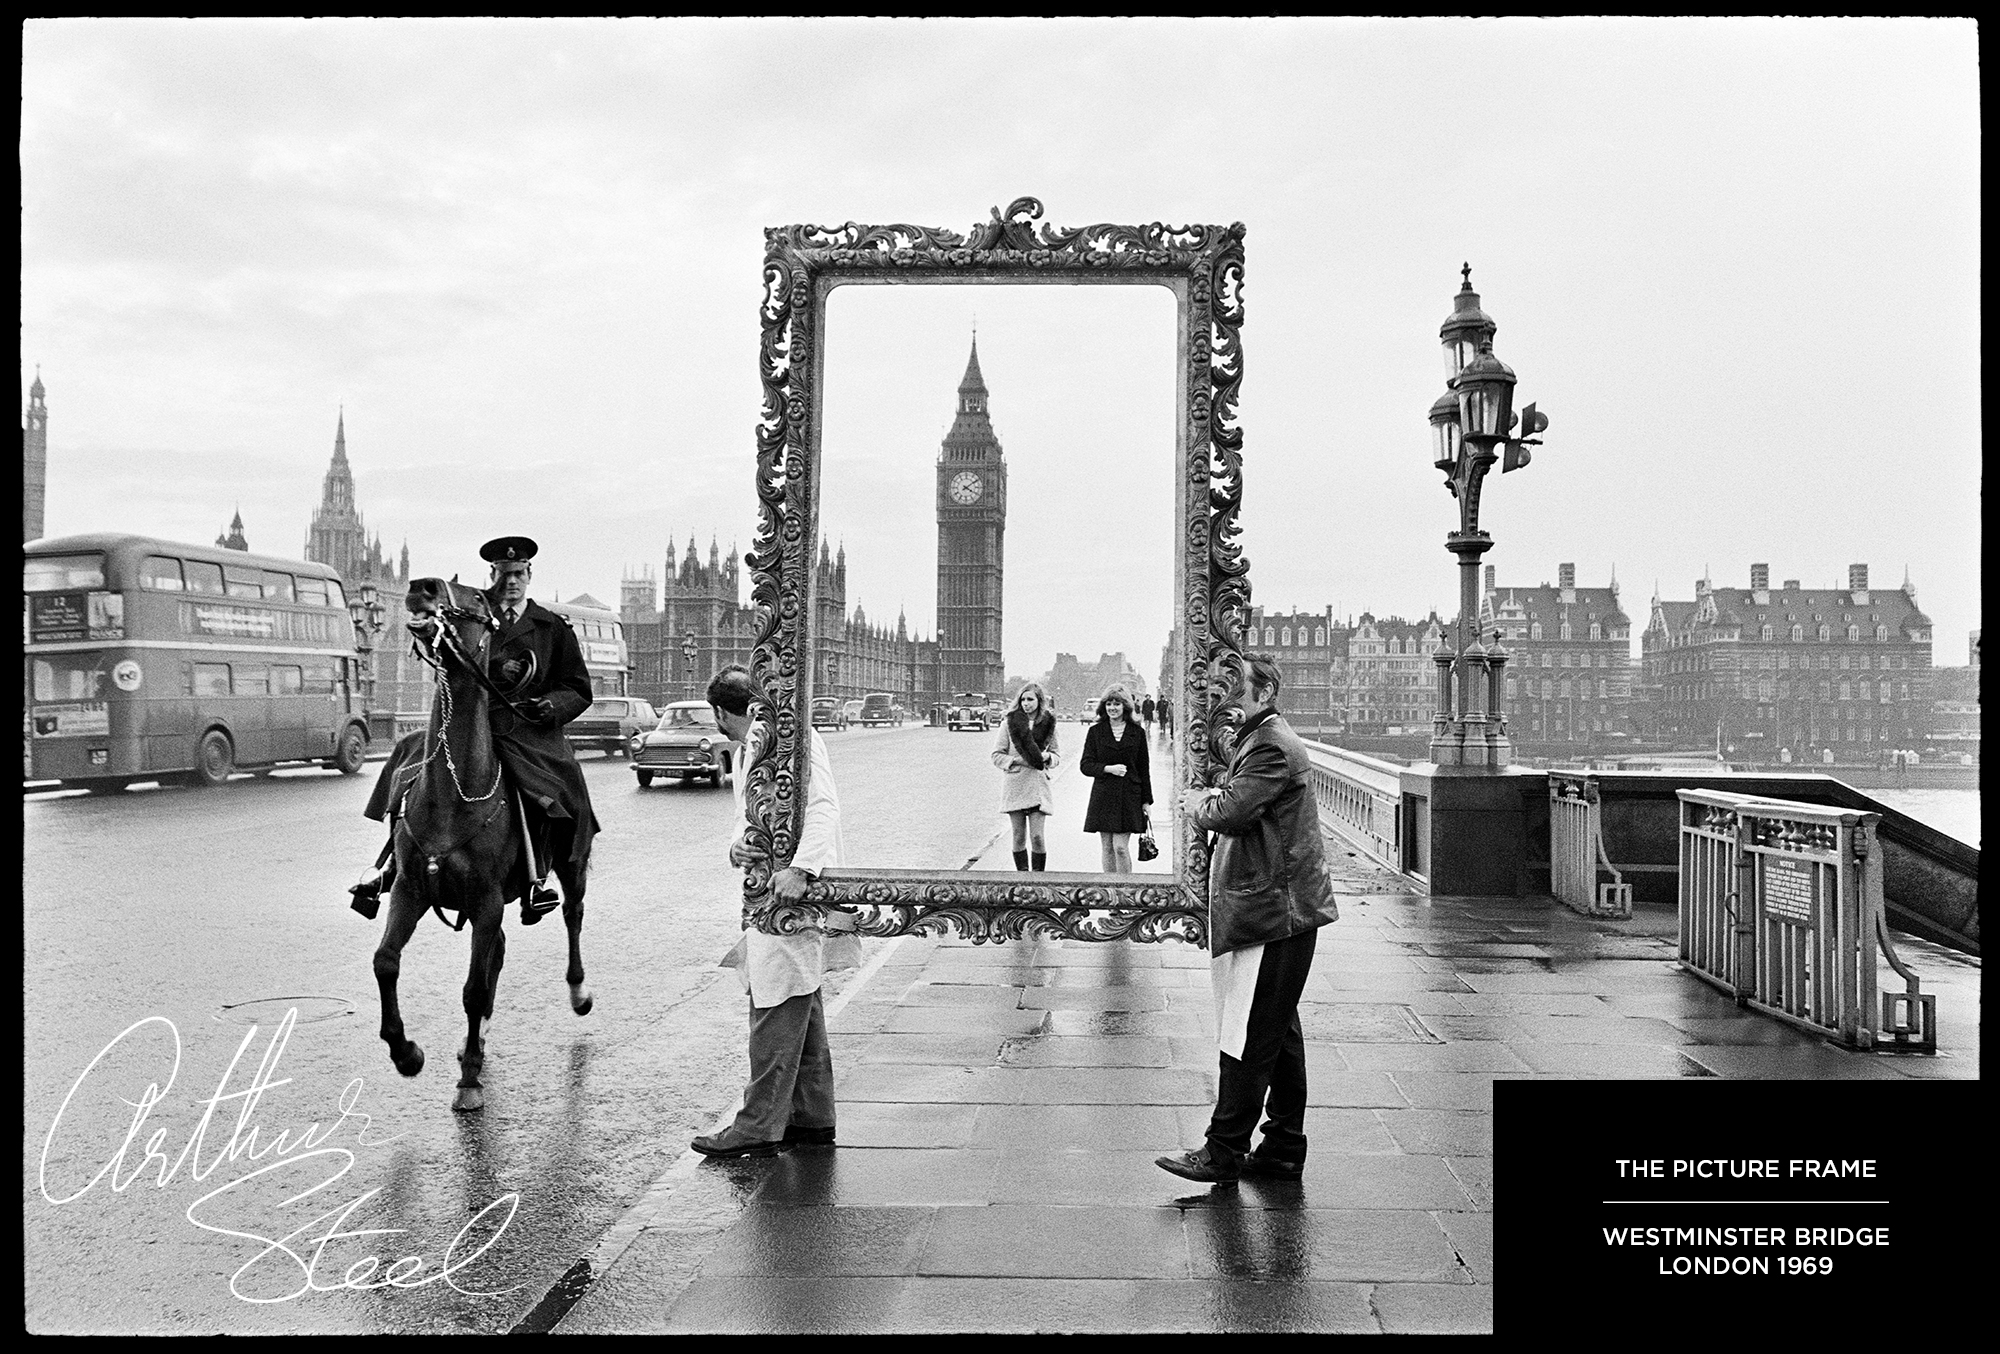 video about the rare photograph the picture frame elizabeth tower big ben london